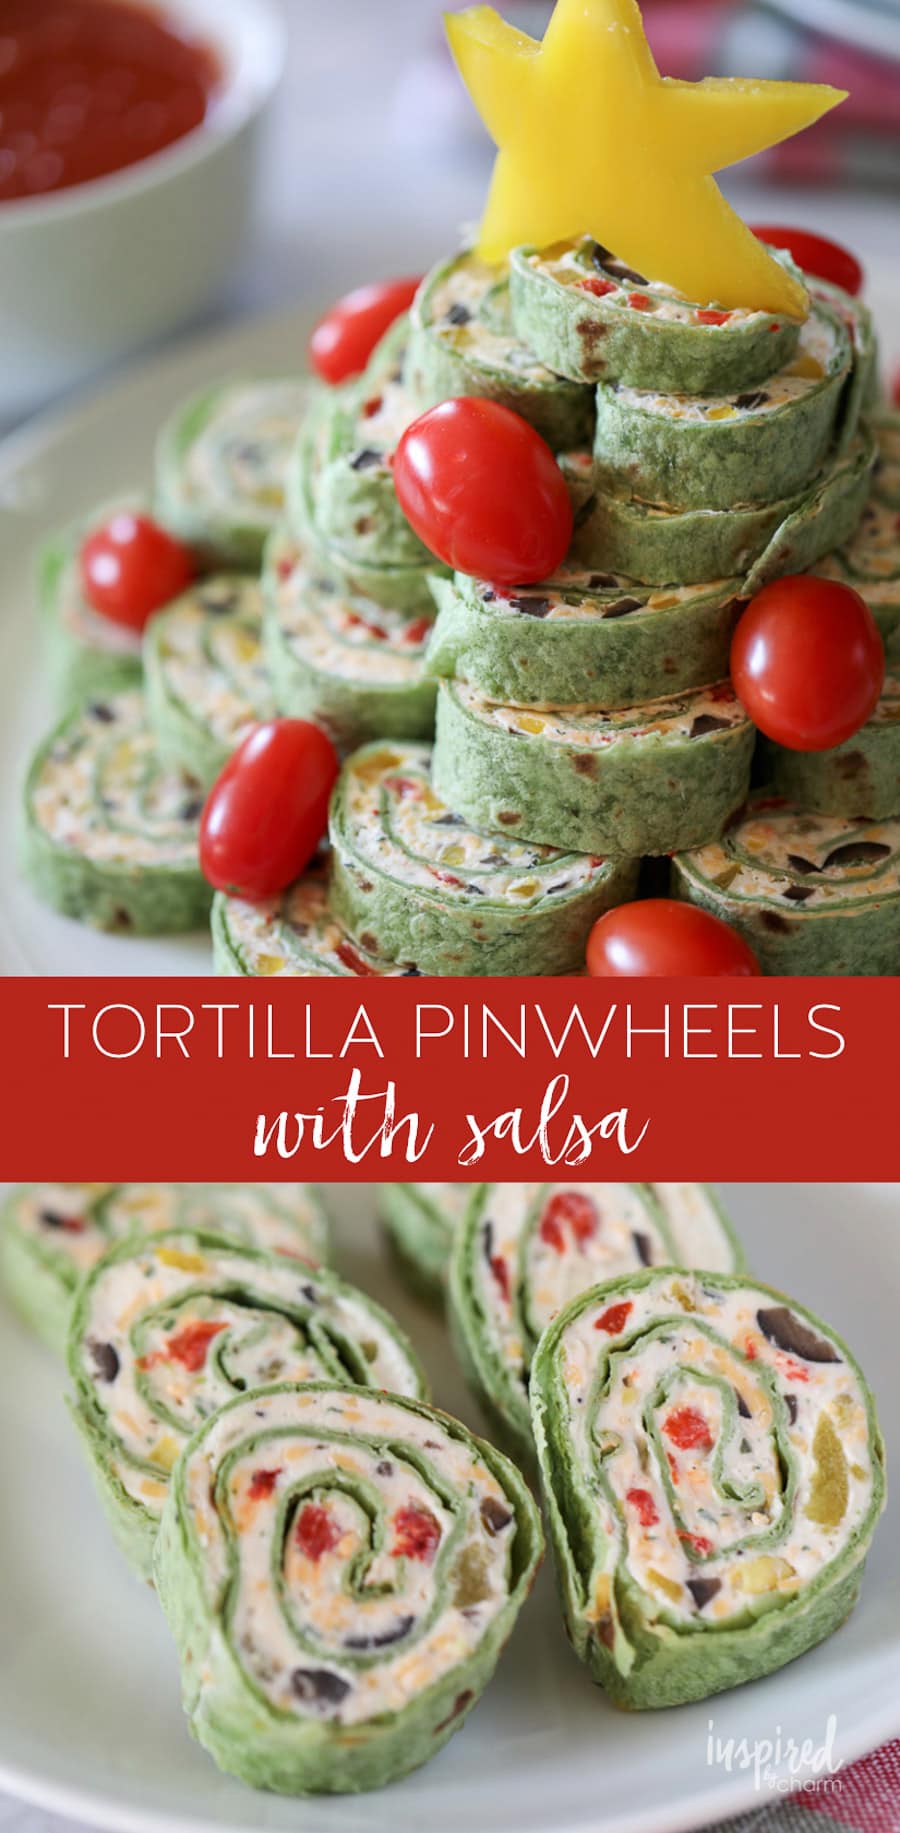 Christmas Tortilla Roll-ups Appetizer recipe for Holiday entertaining #christmas #appetizer #pinwheel #rollup #recipe